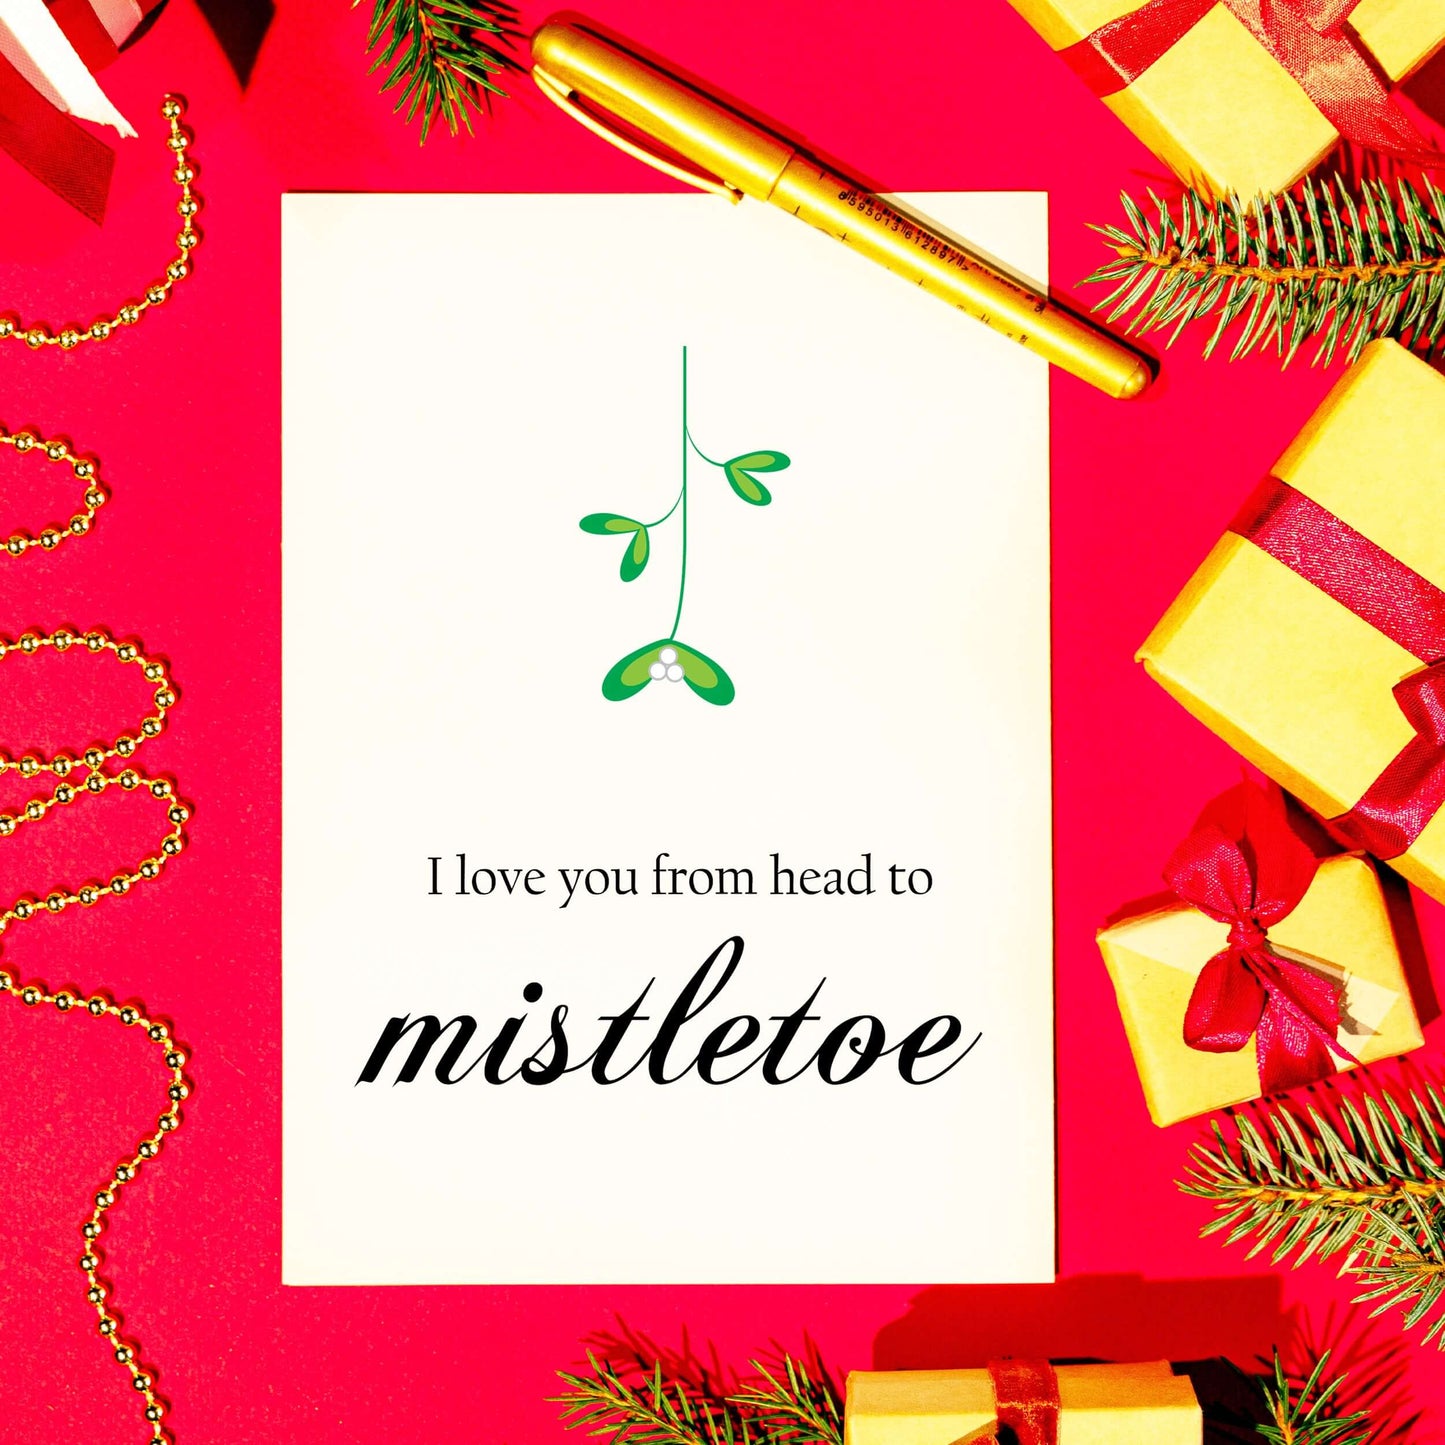 I Love You From Head to Mistletoe Funny Christmas Greeting Card